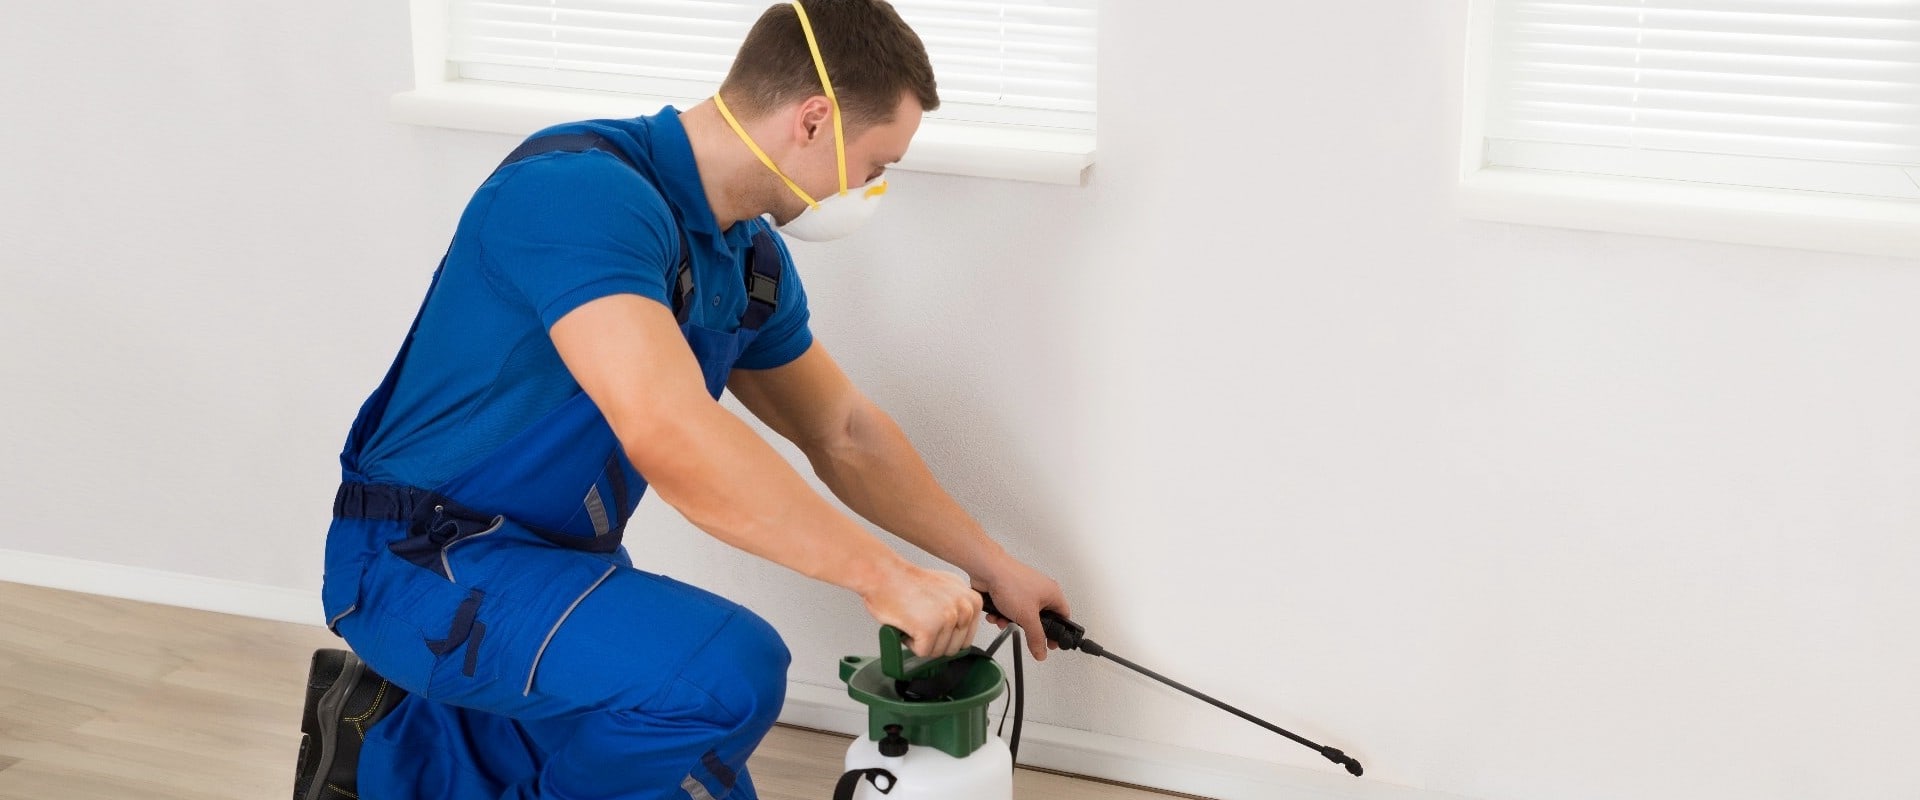 How profitable is a pest control business?